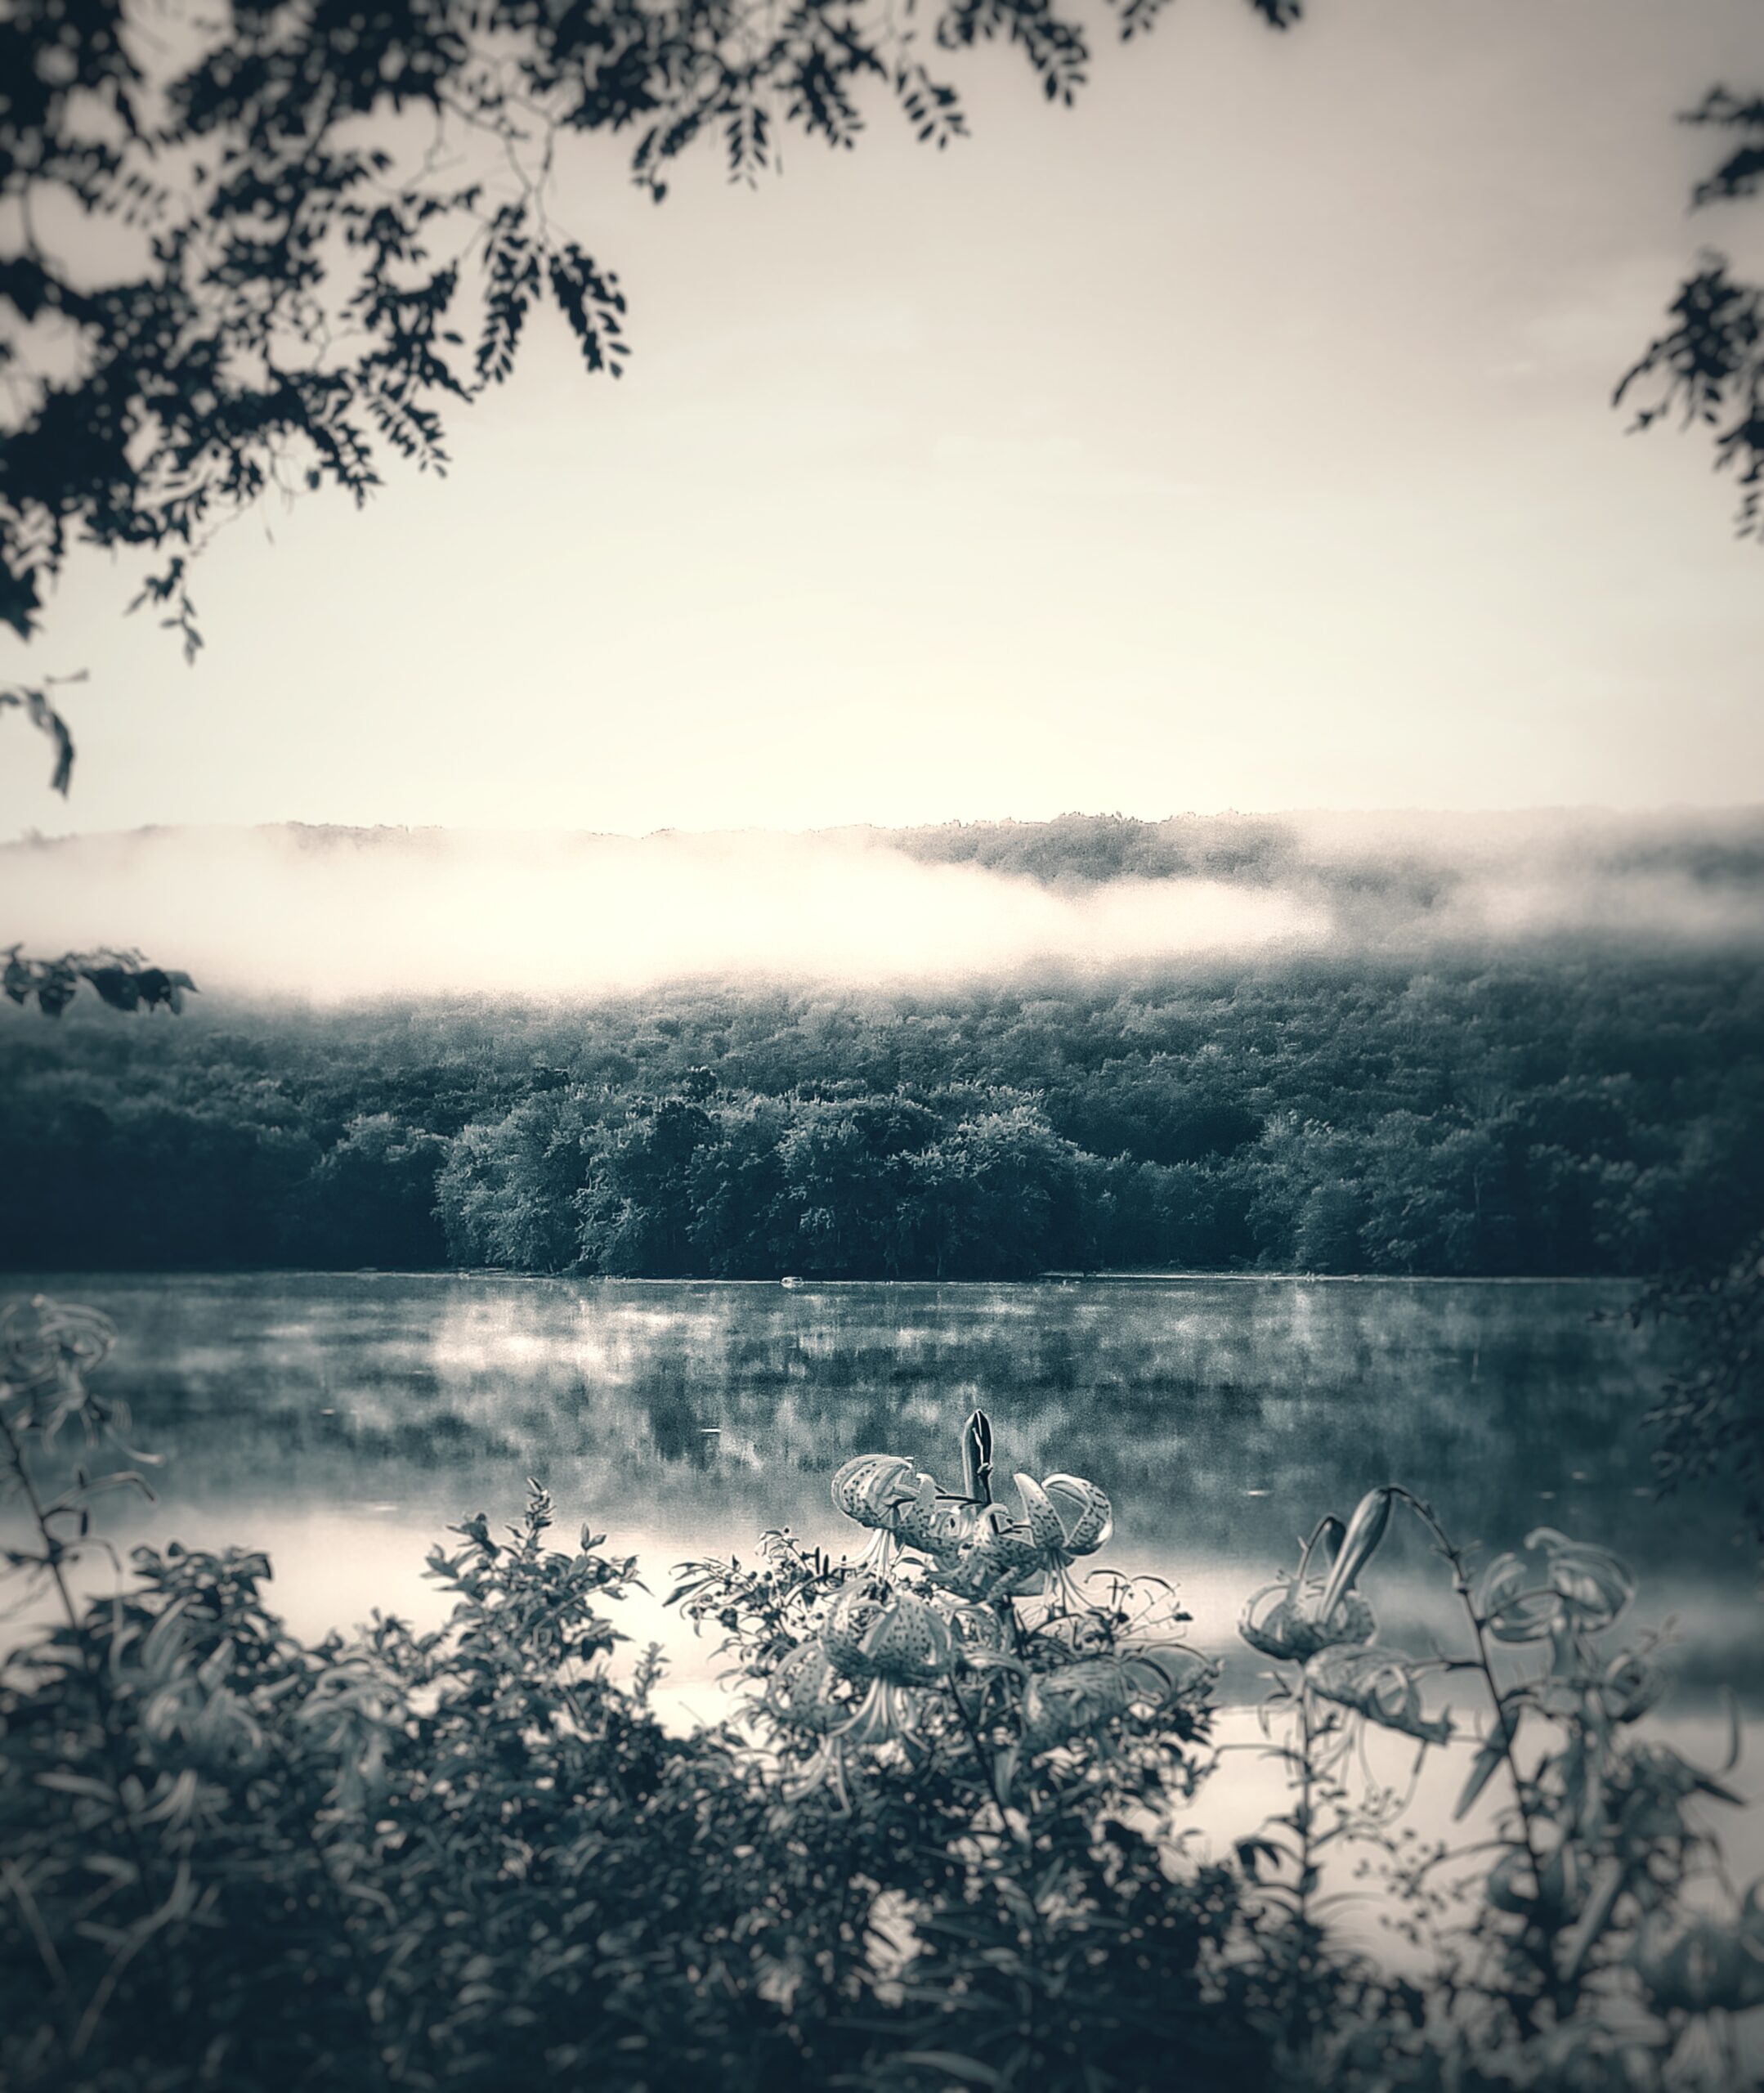 The Mists of Sodom Reservoir